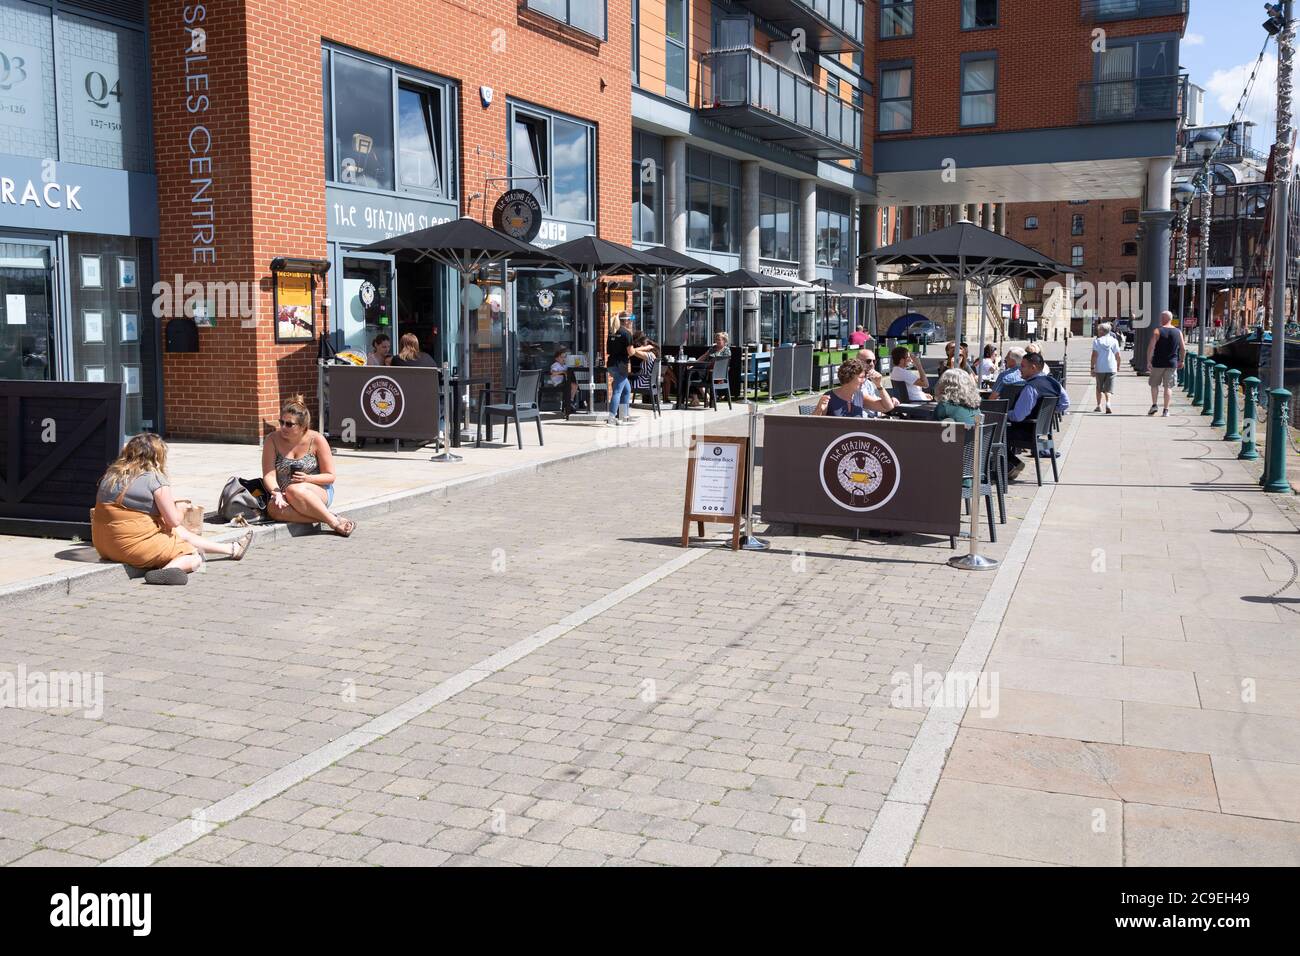 People sitting outside newly reopened cafes on the waterfront, Wet Dock, Ipswich, Suffolk, England, UK July 2020 Stock Photo